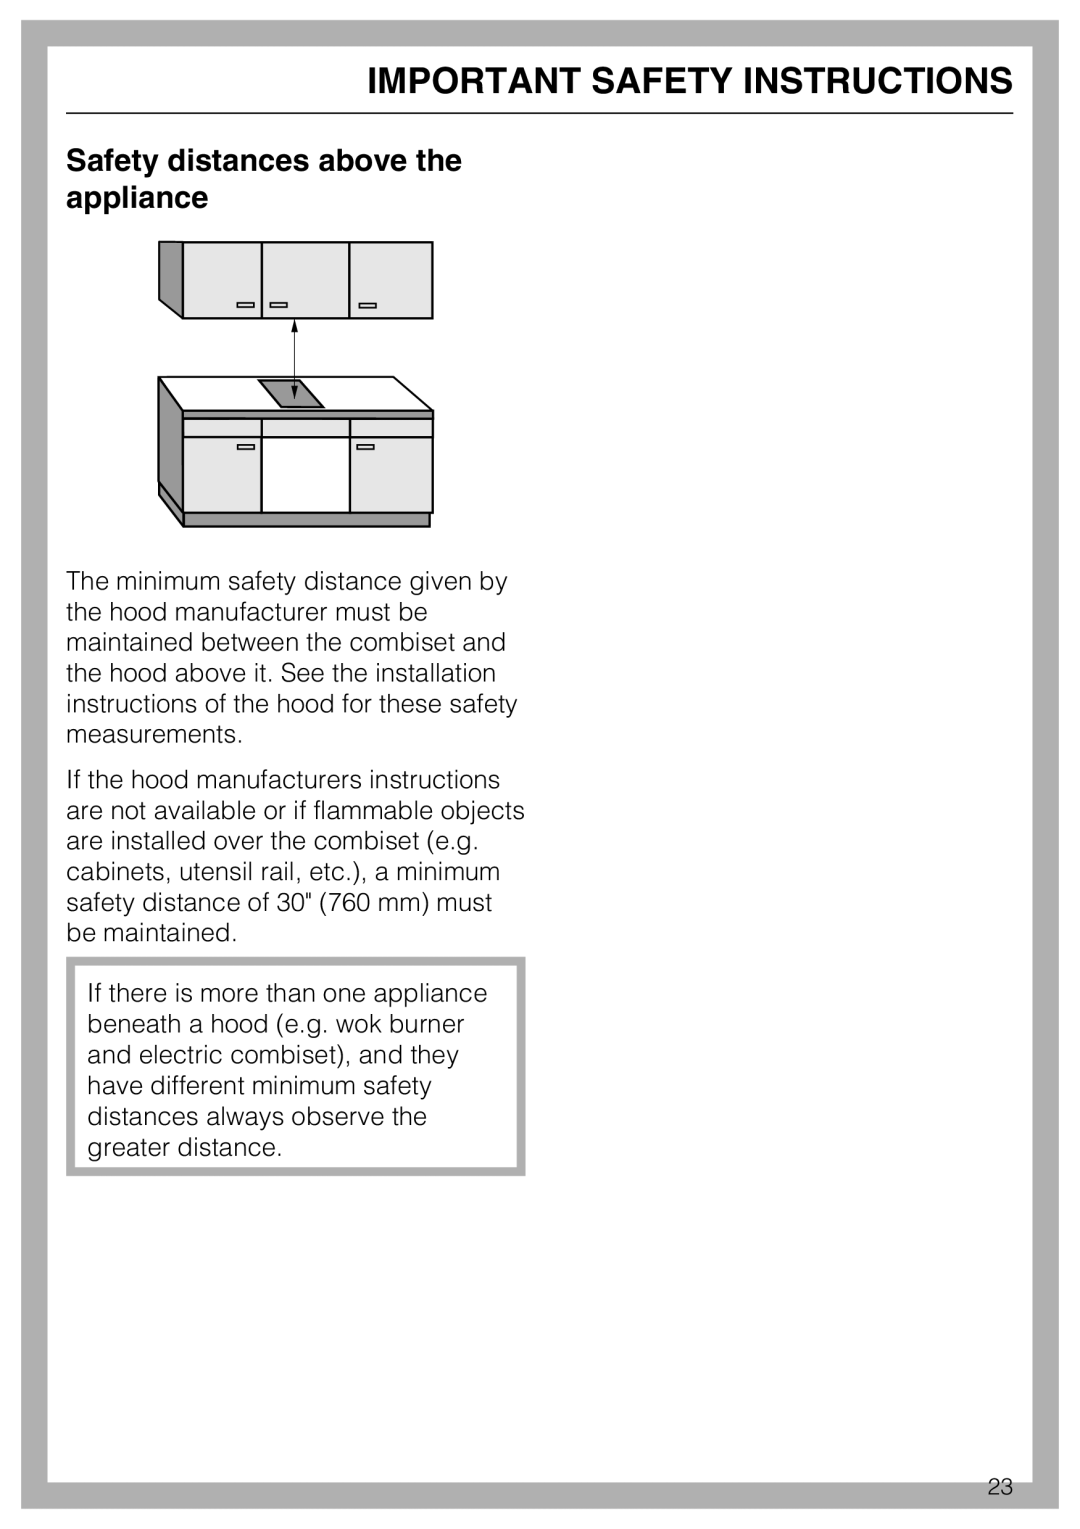 Miele CS1028 installation instructions Safety distances above the appliance, Important Safety Instructions 